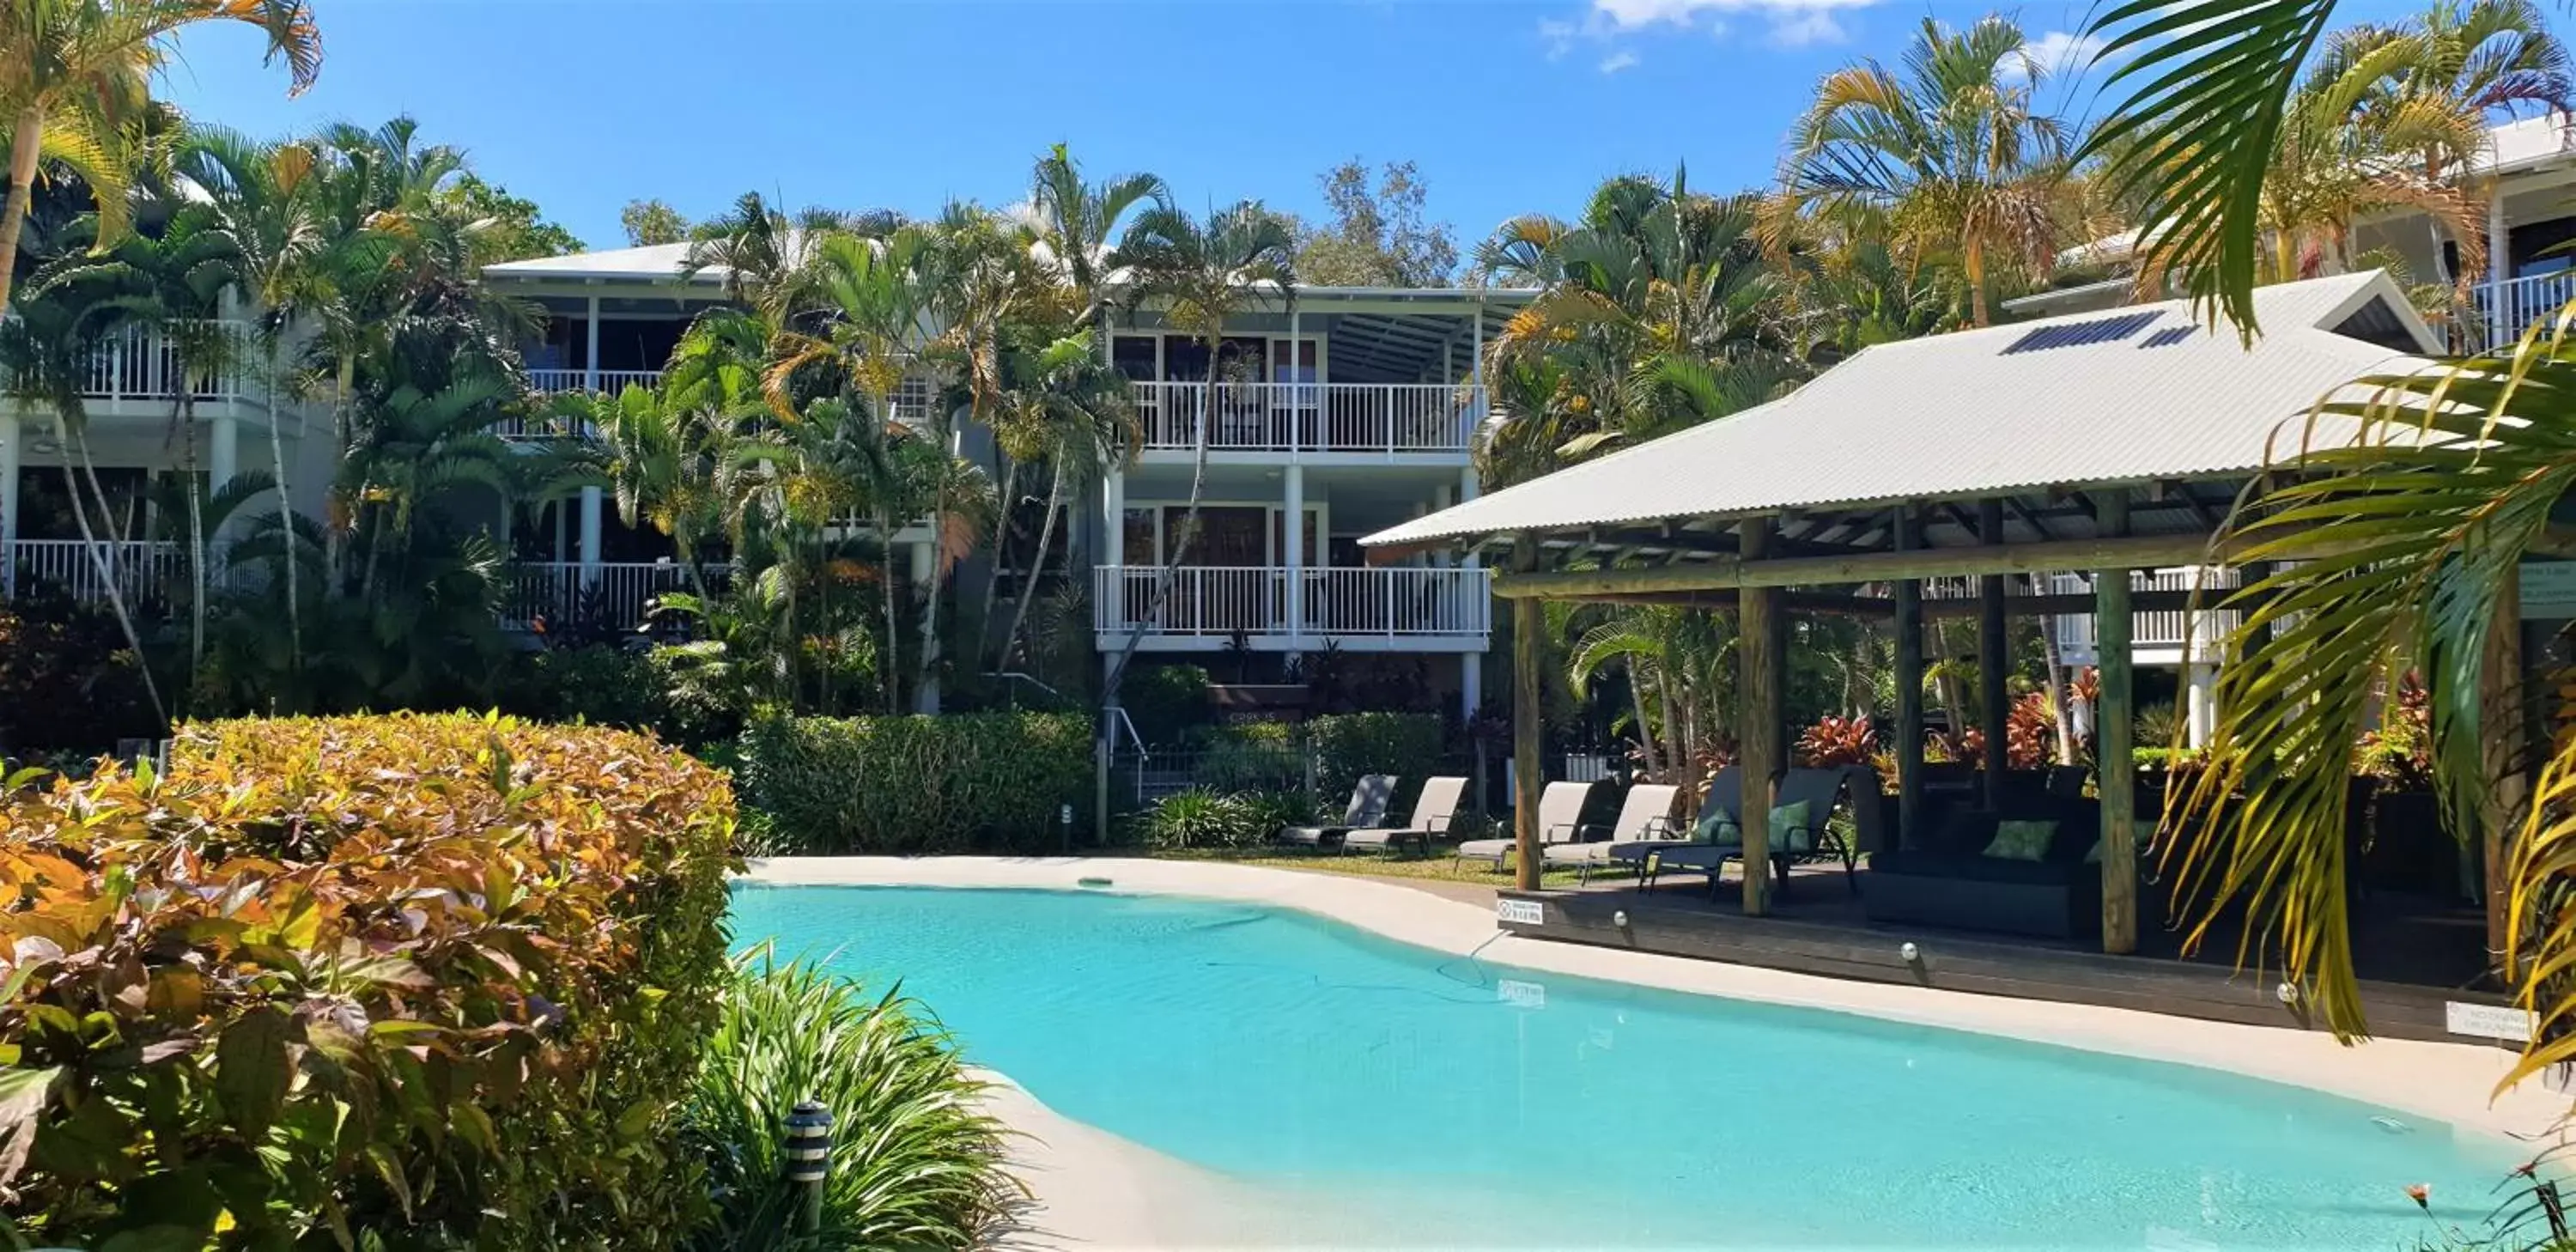 Swimming Pool in South Pacific Resort & Spa Noosa